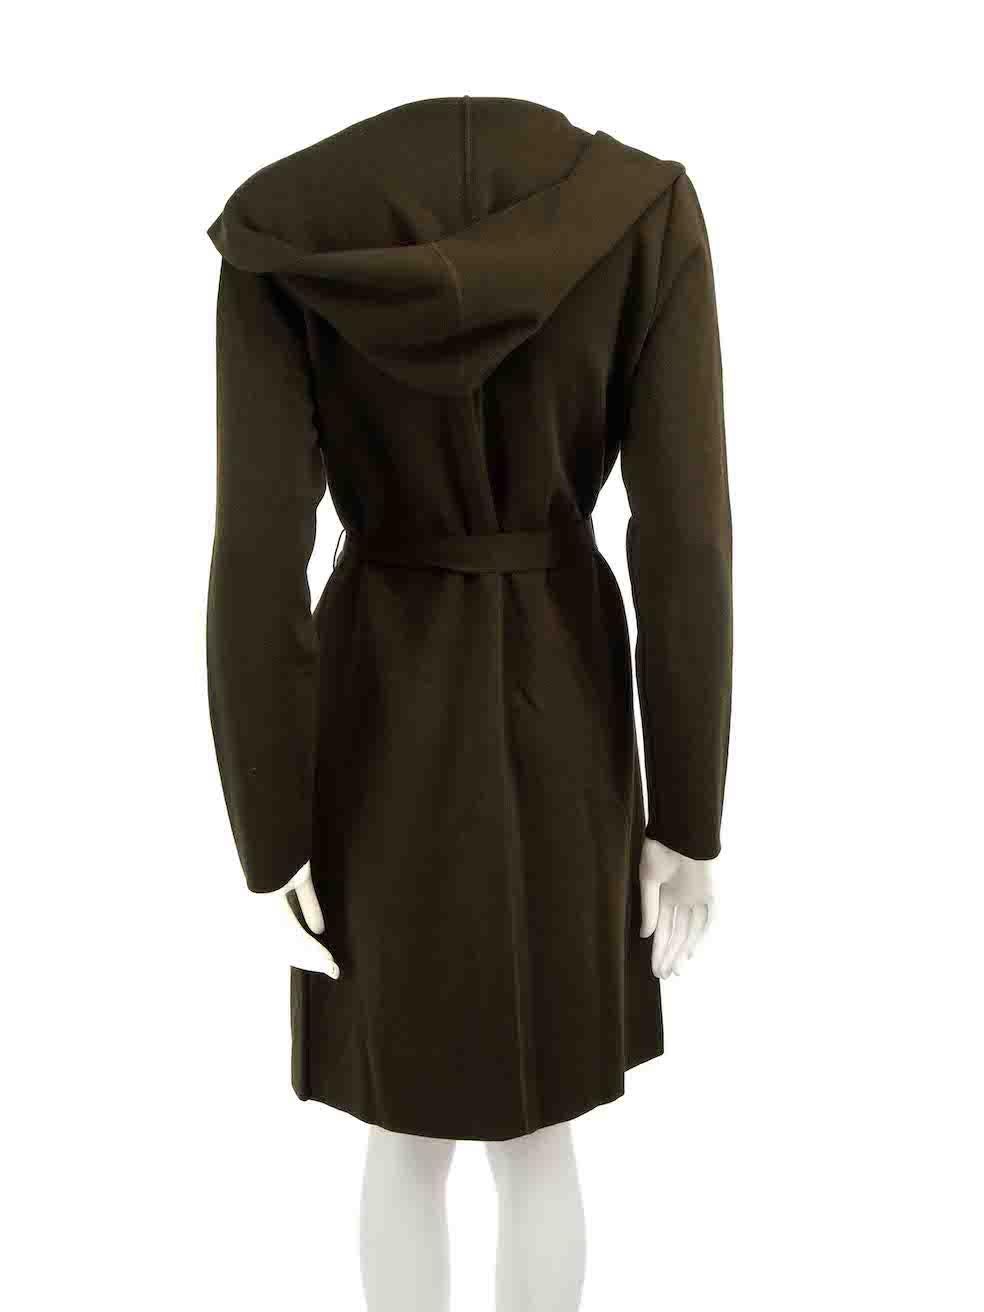 Max Mara Khaki Wool Belted Coat Size M In Good Condition For Sale In London, GB